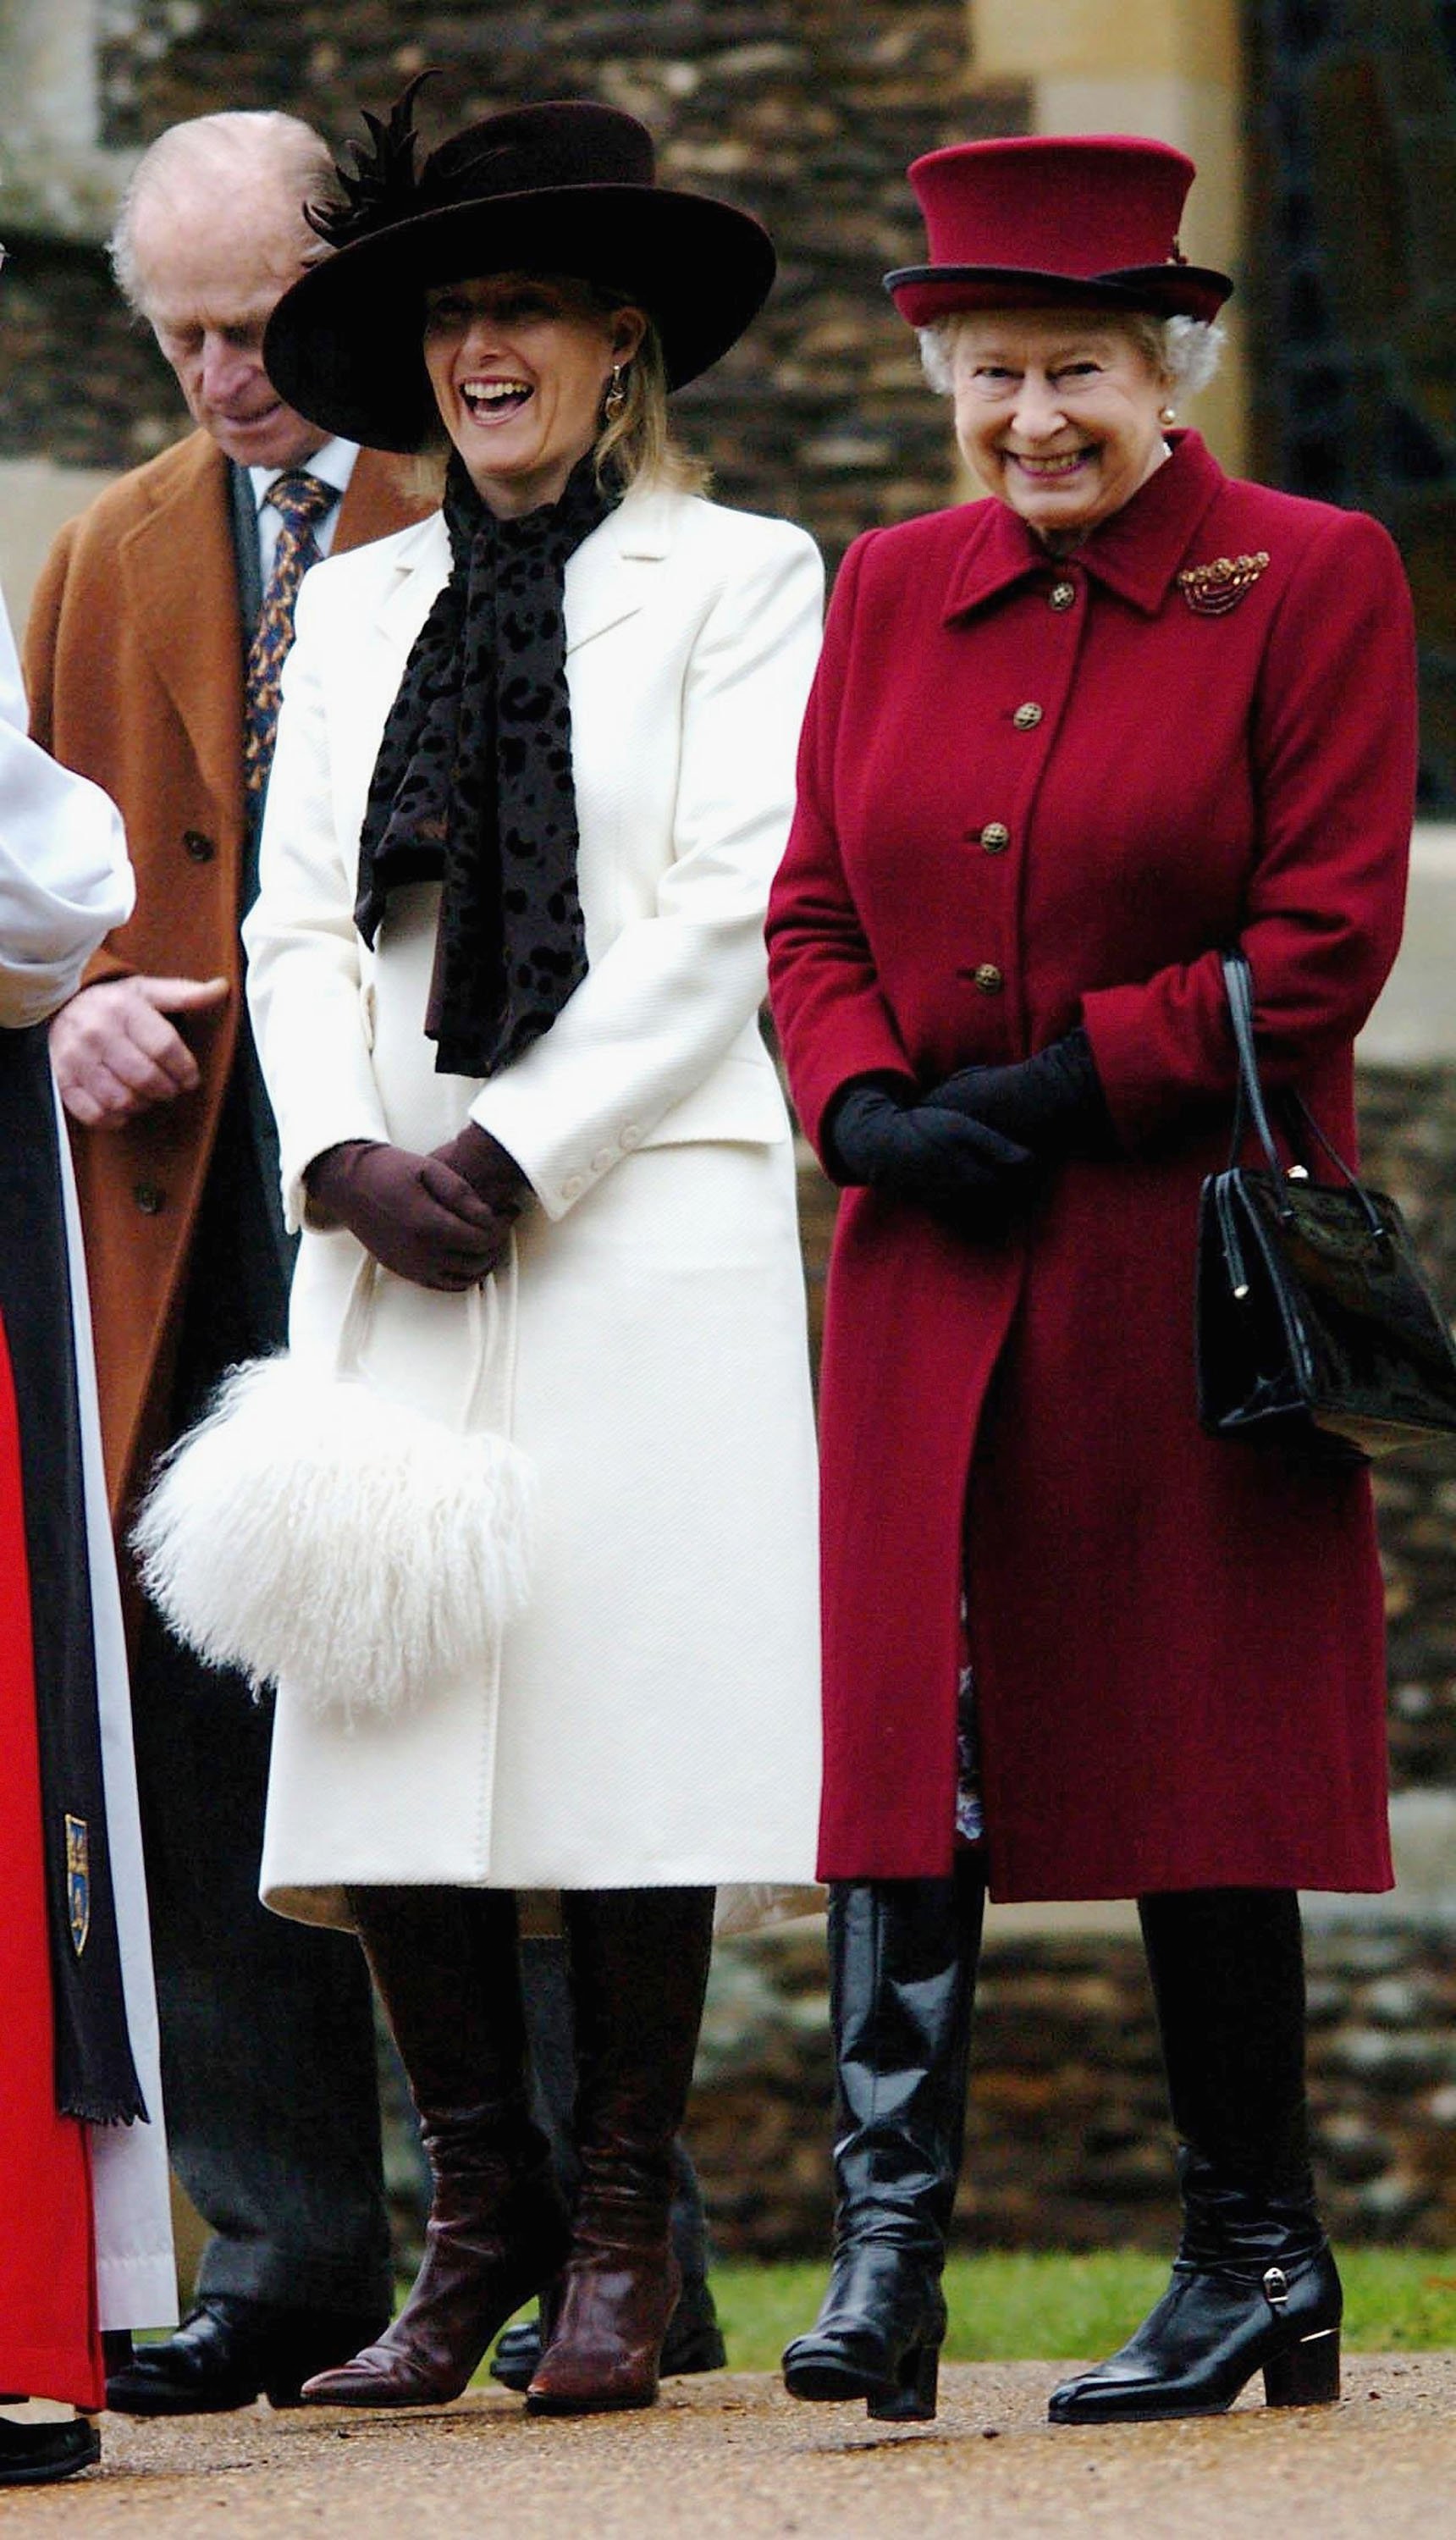 Queen Elizabeth II, smiles as she leaves St Mary Magdalene Church, alongside Sophie, Countess of Wessex and the Duke of Edinburgh on January 1, 2006, at Sandringham, England | Source: Getty Images 